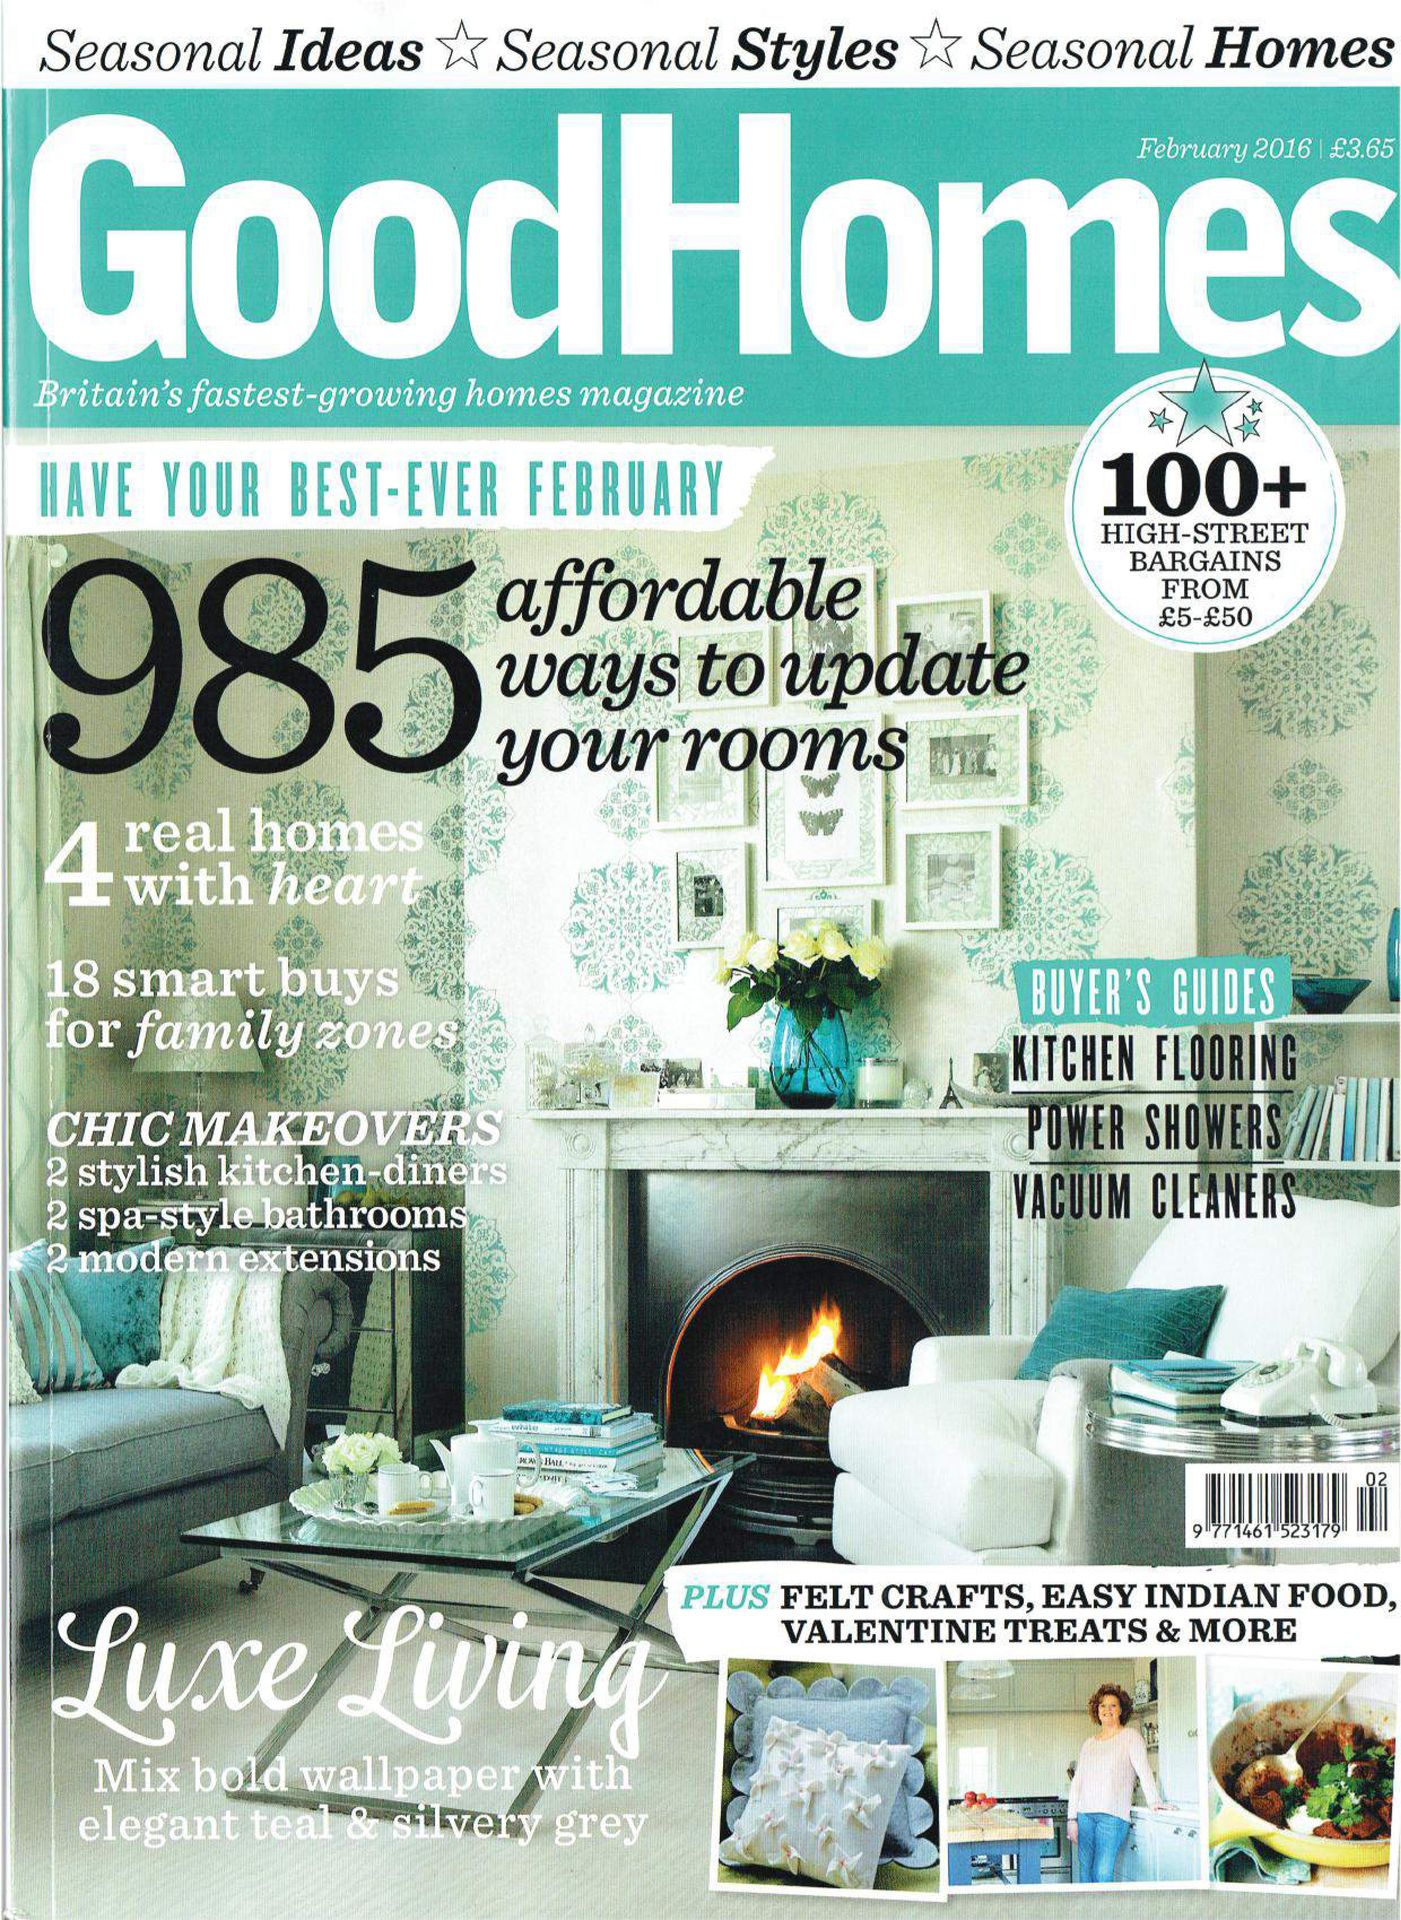 Build Team featured in Good Homes